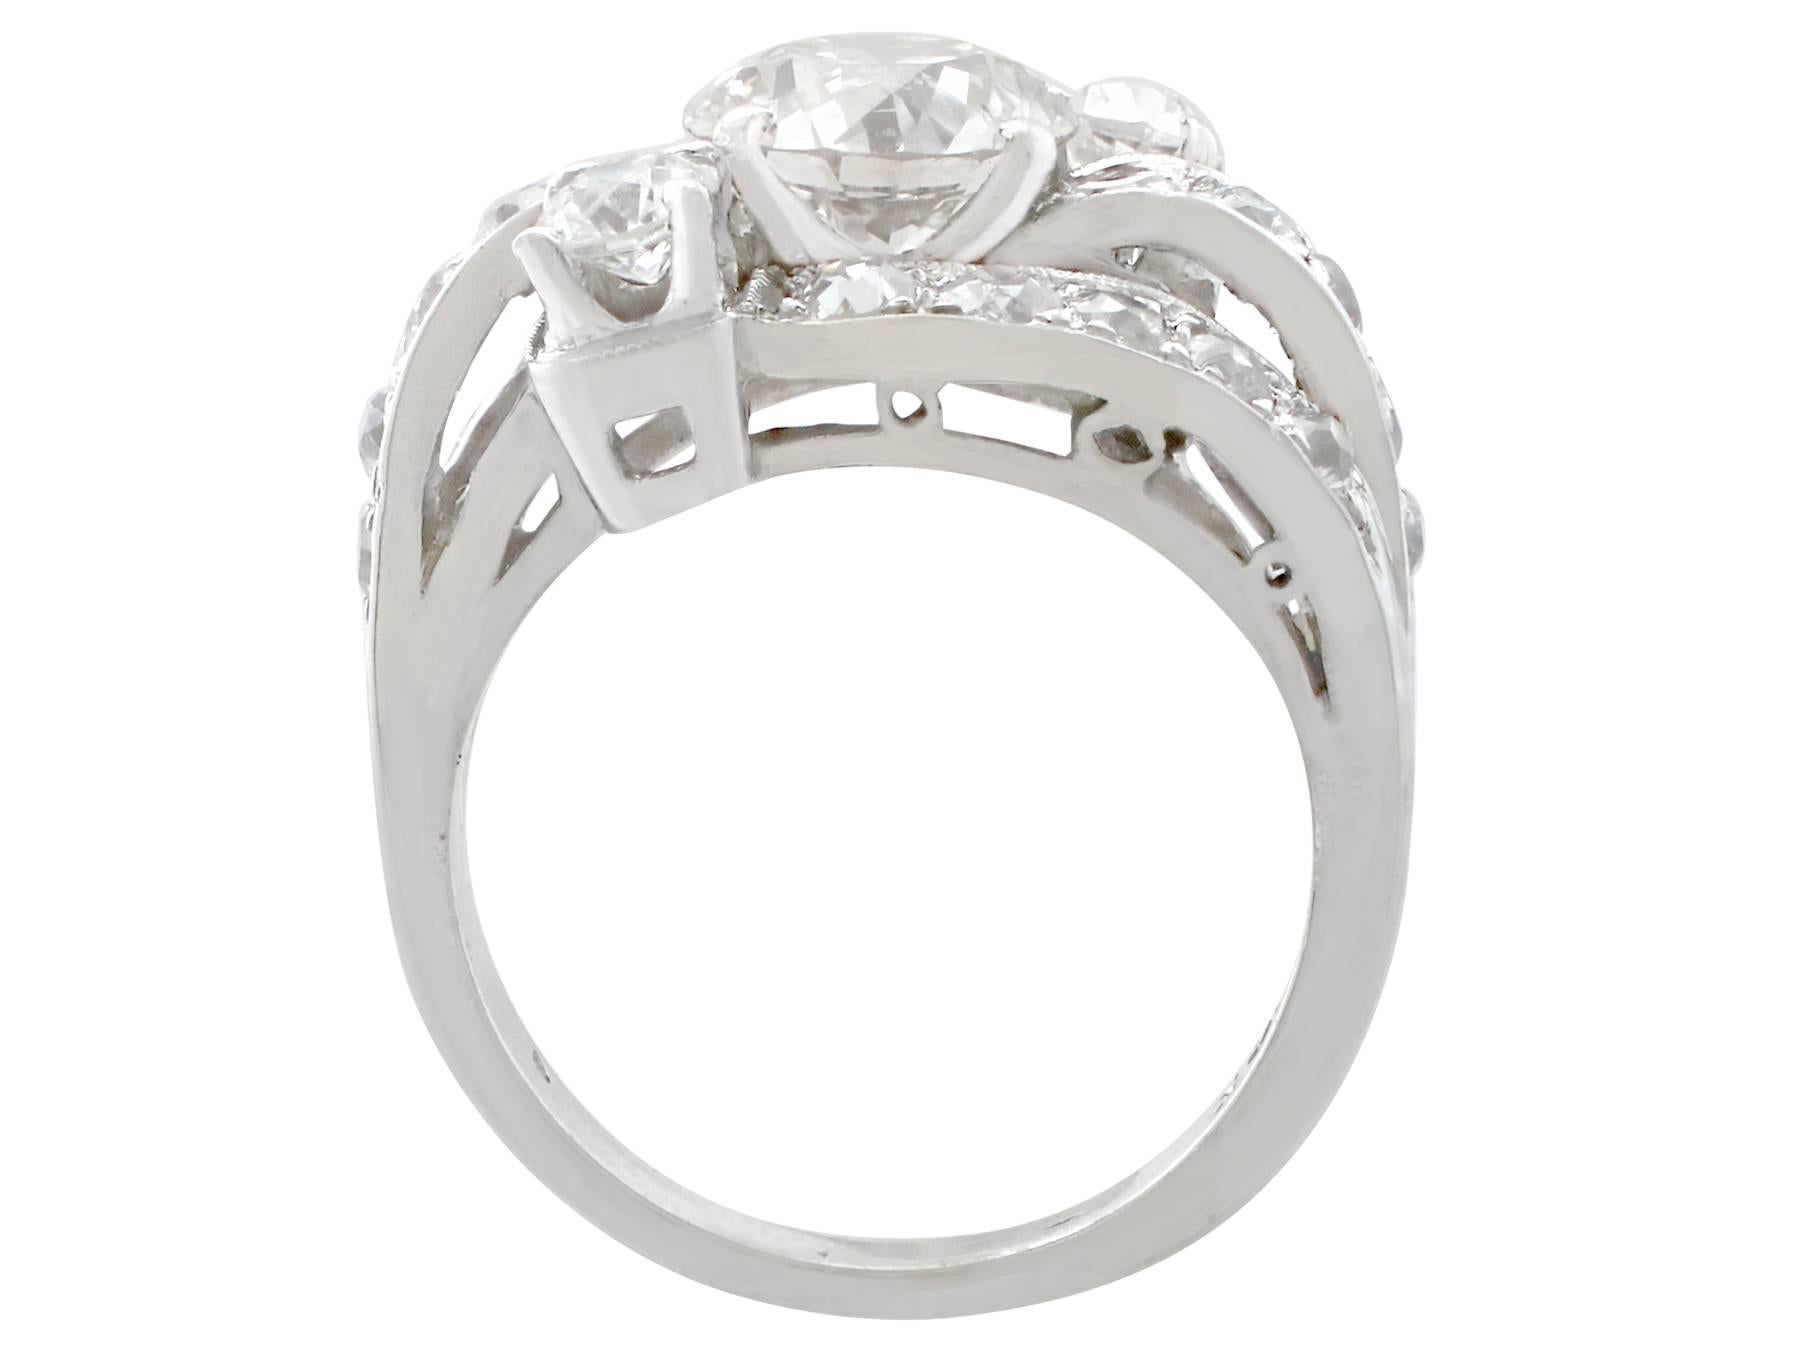 Women's 1940s 2.50 Carat Diamond and White Gold Cocktail Ring